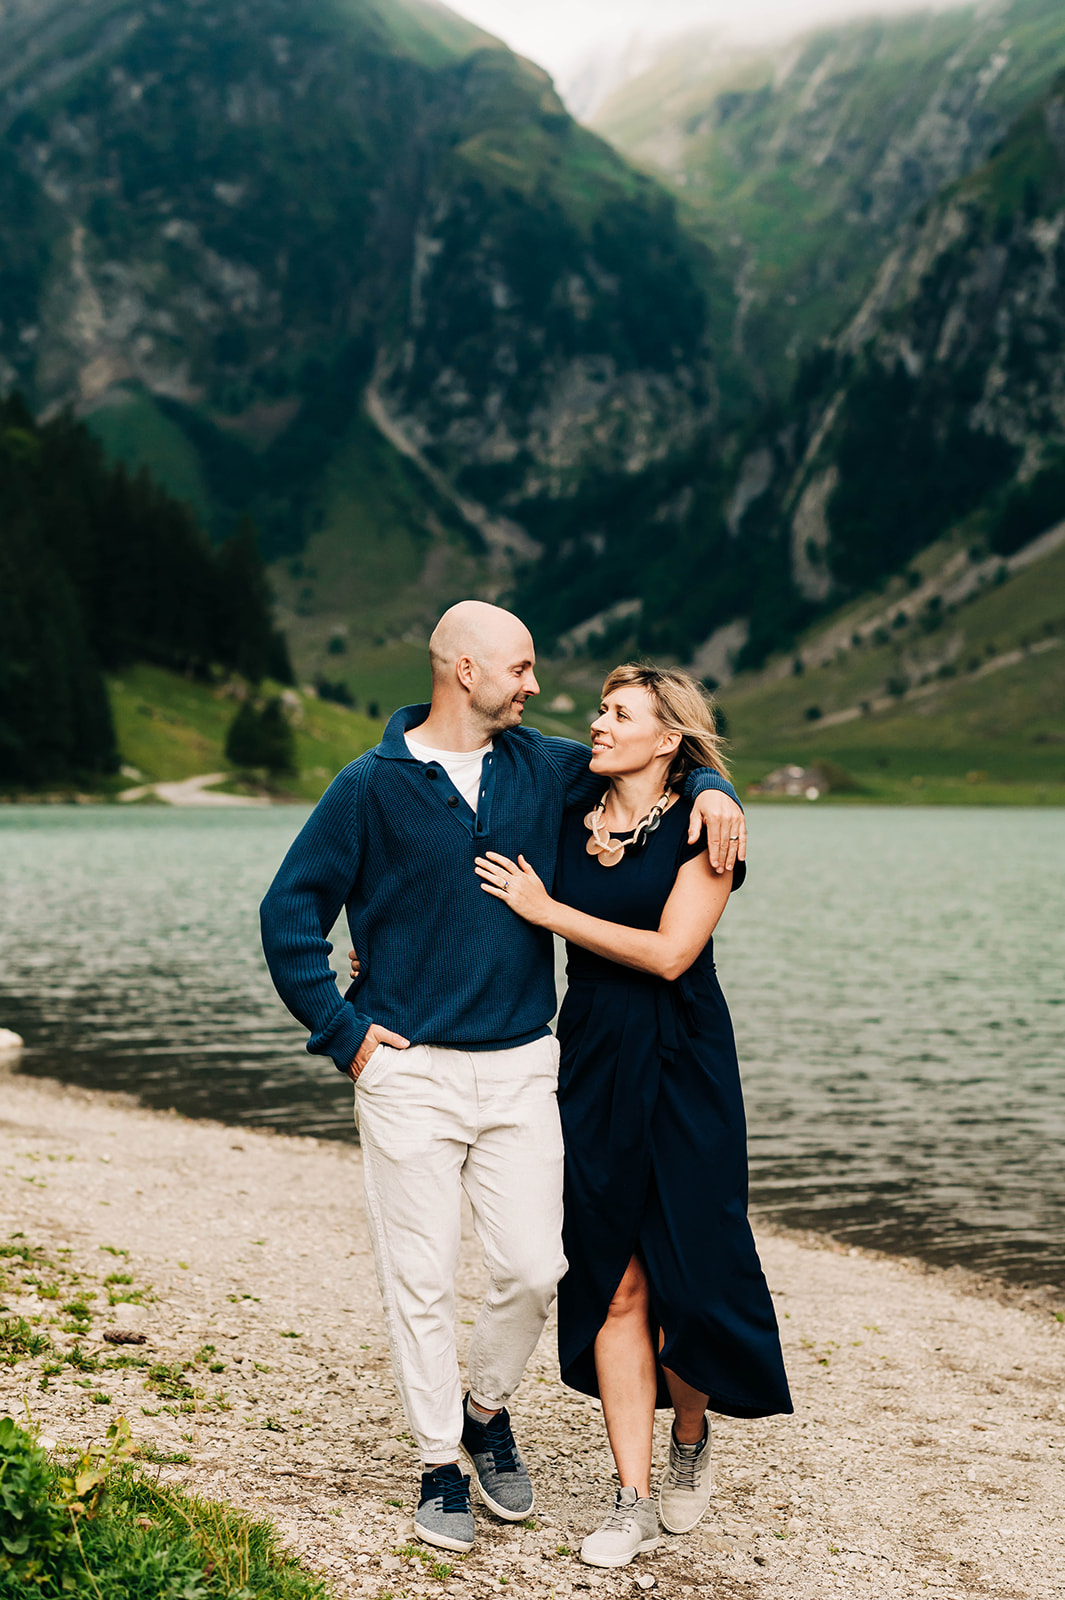 Quality time for parents along the shores of Seealpsee